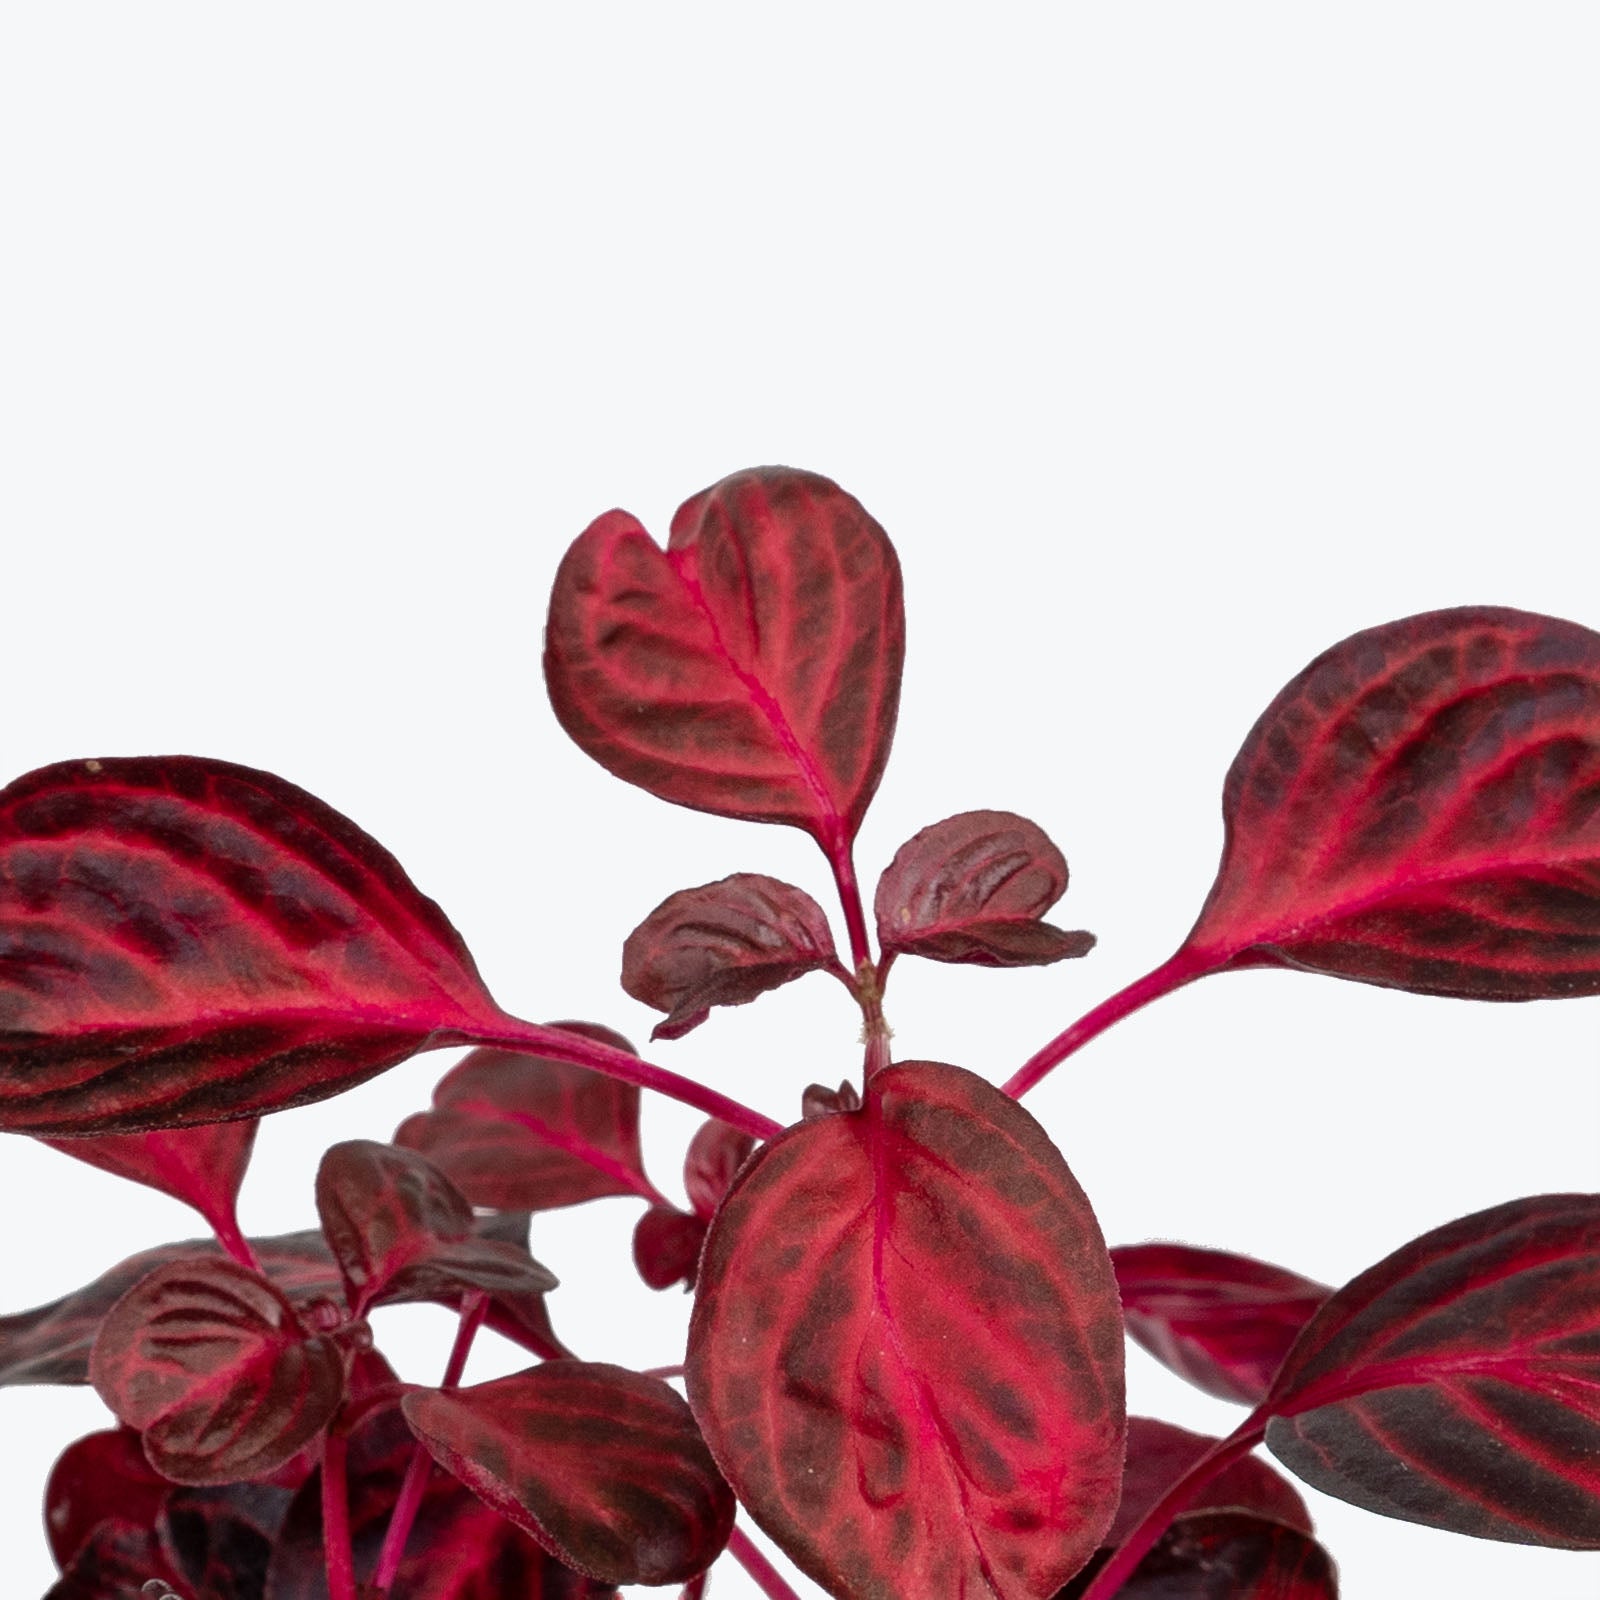 Iresine Herbstii Brilliantissima | Bloodleaf | Care Guide and Pro Tips - Delivery from Toronto across Canada - JOMO Studio